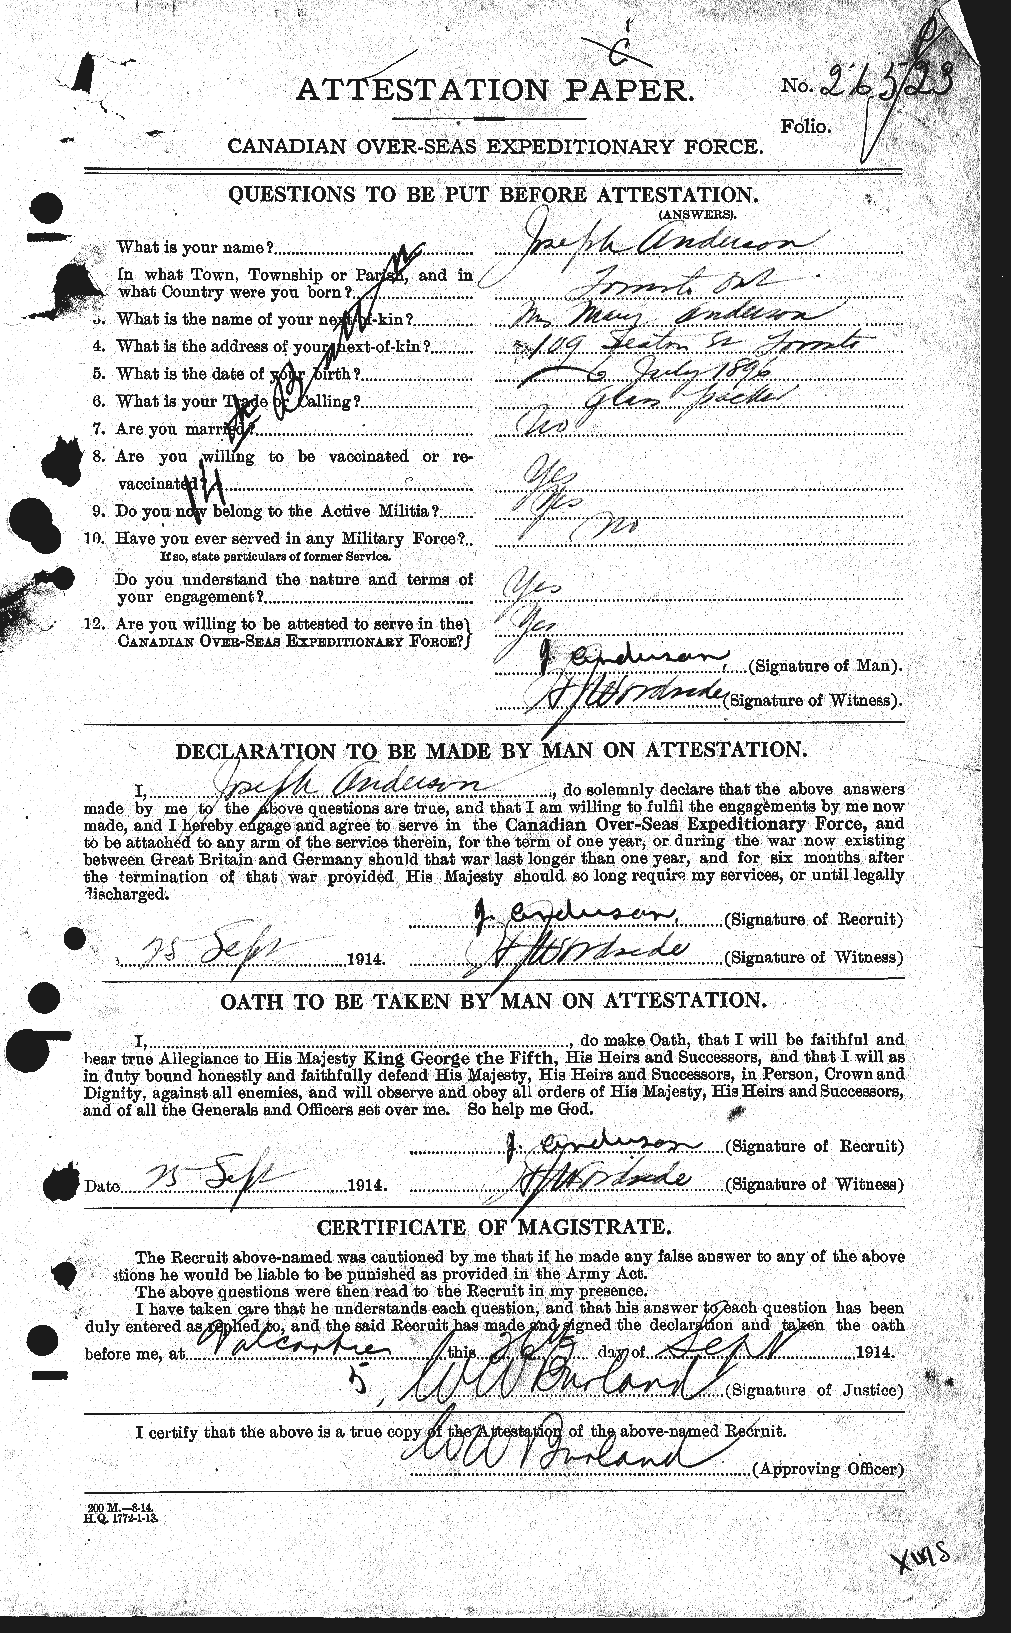 Personnel Records of the First World War - CEF 207505a